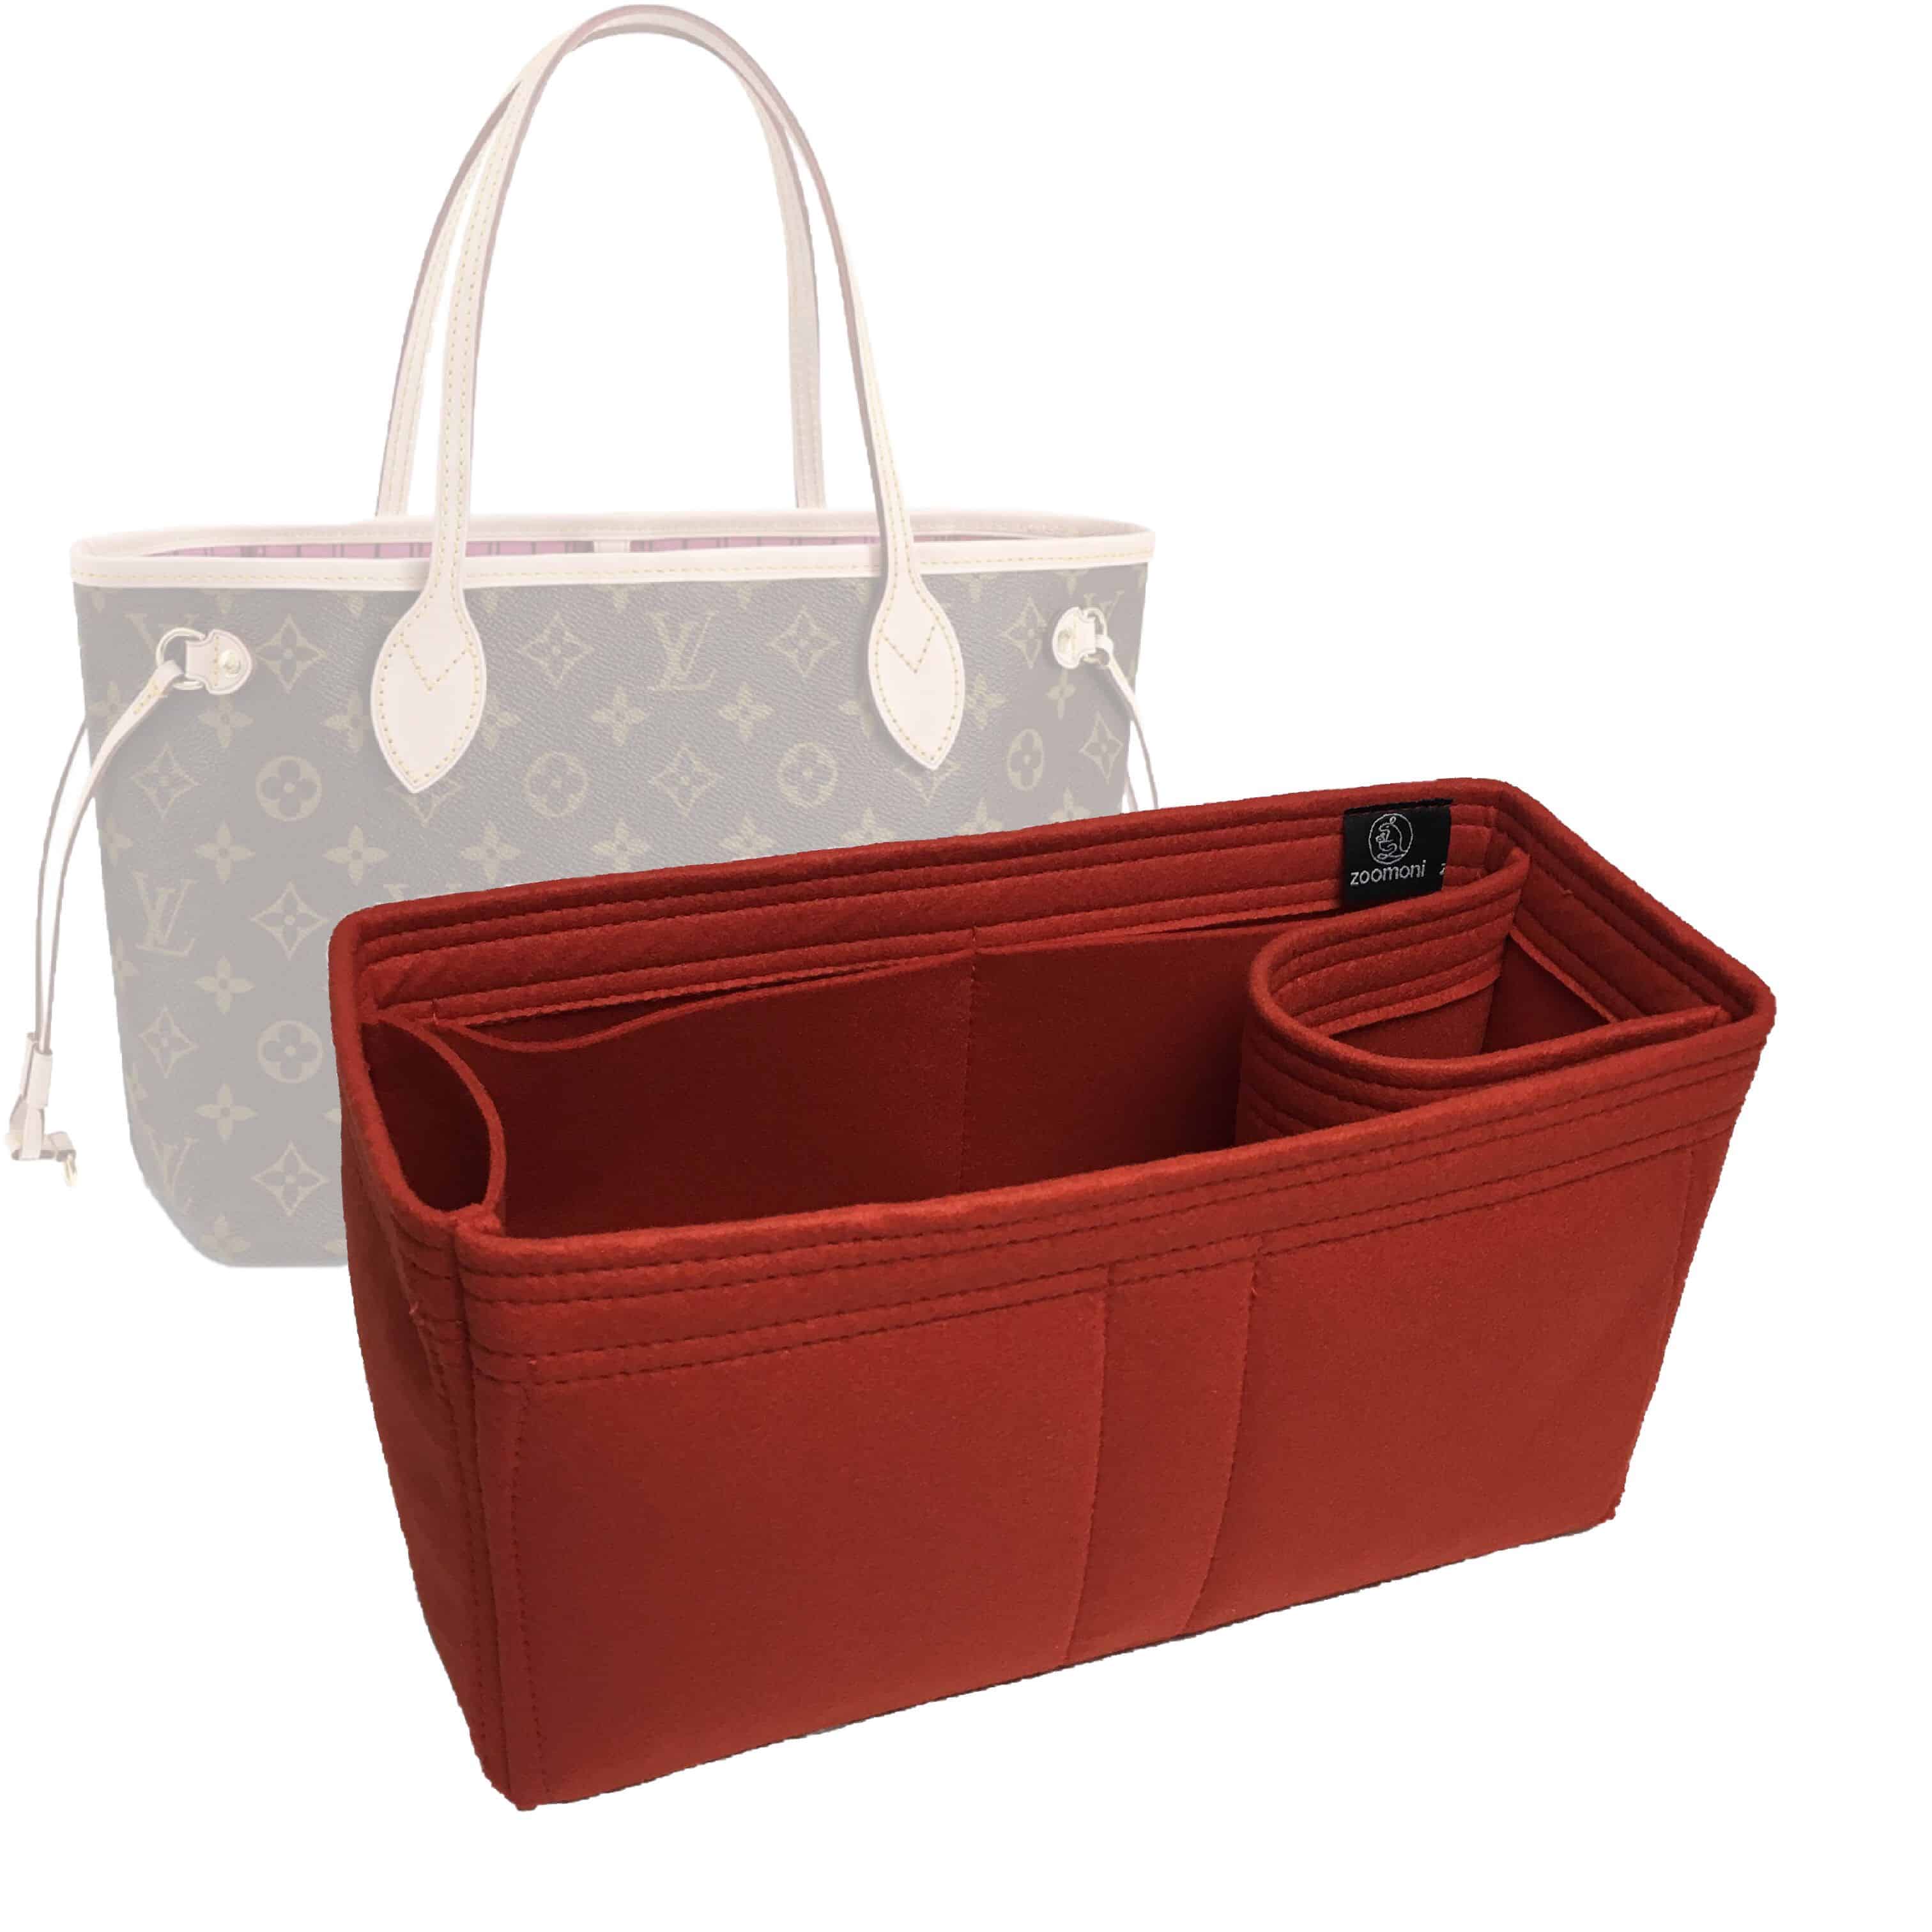 Tote Bag Organizer For Louis Vuitton Galliera PM Bag with Single Bottl